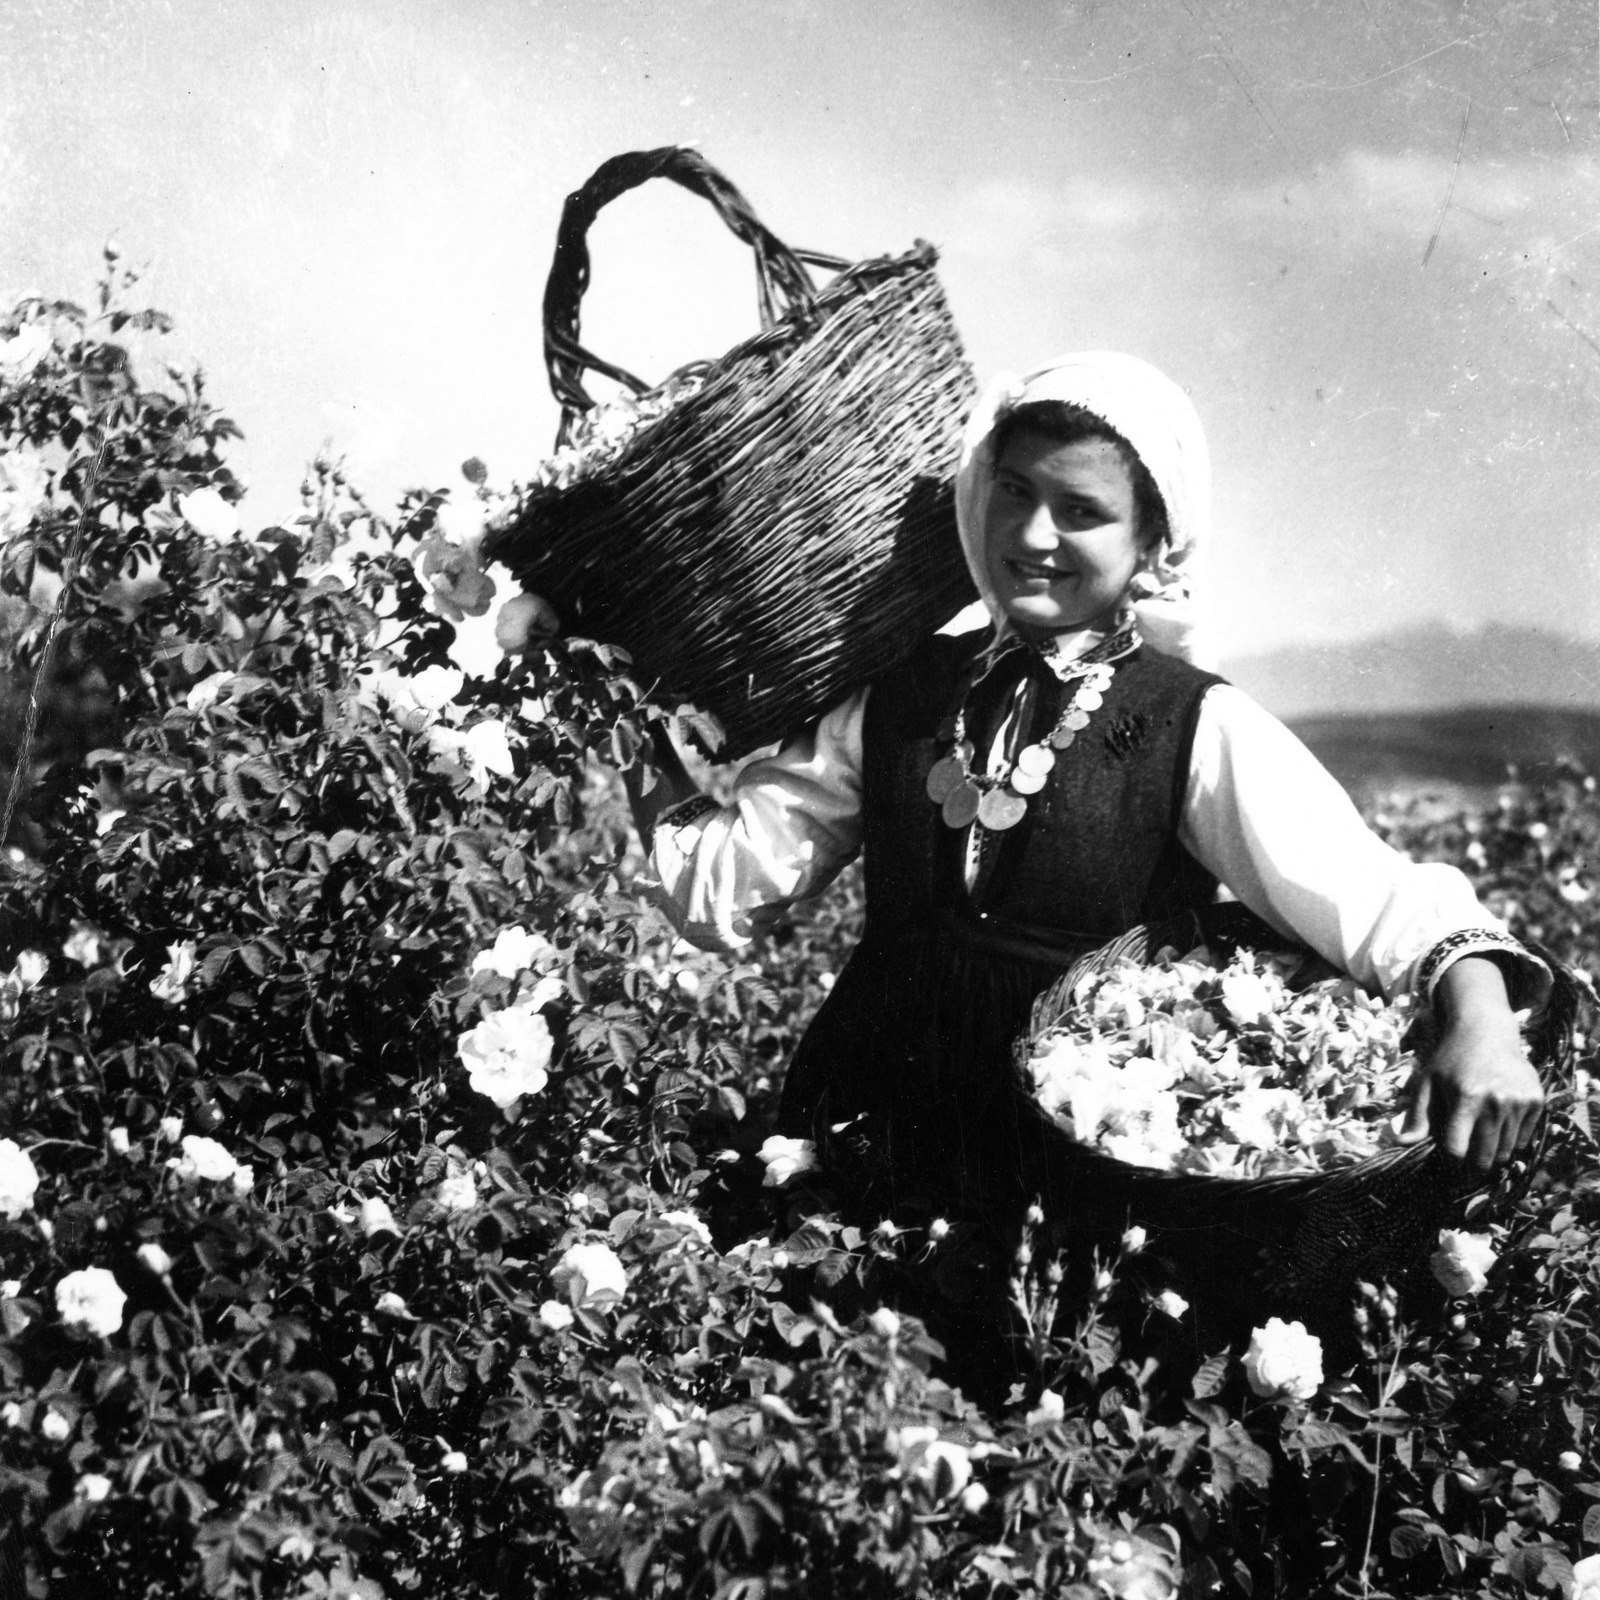 Rose picker with baskets full of pink flowers.